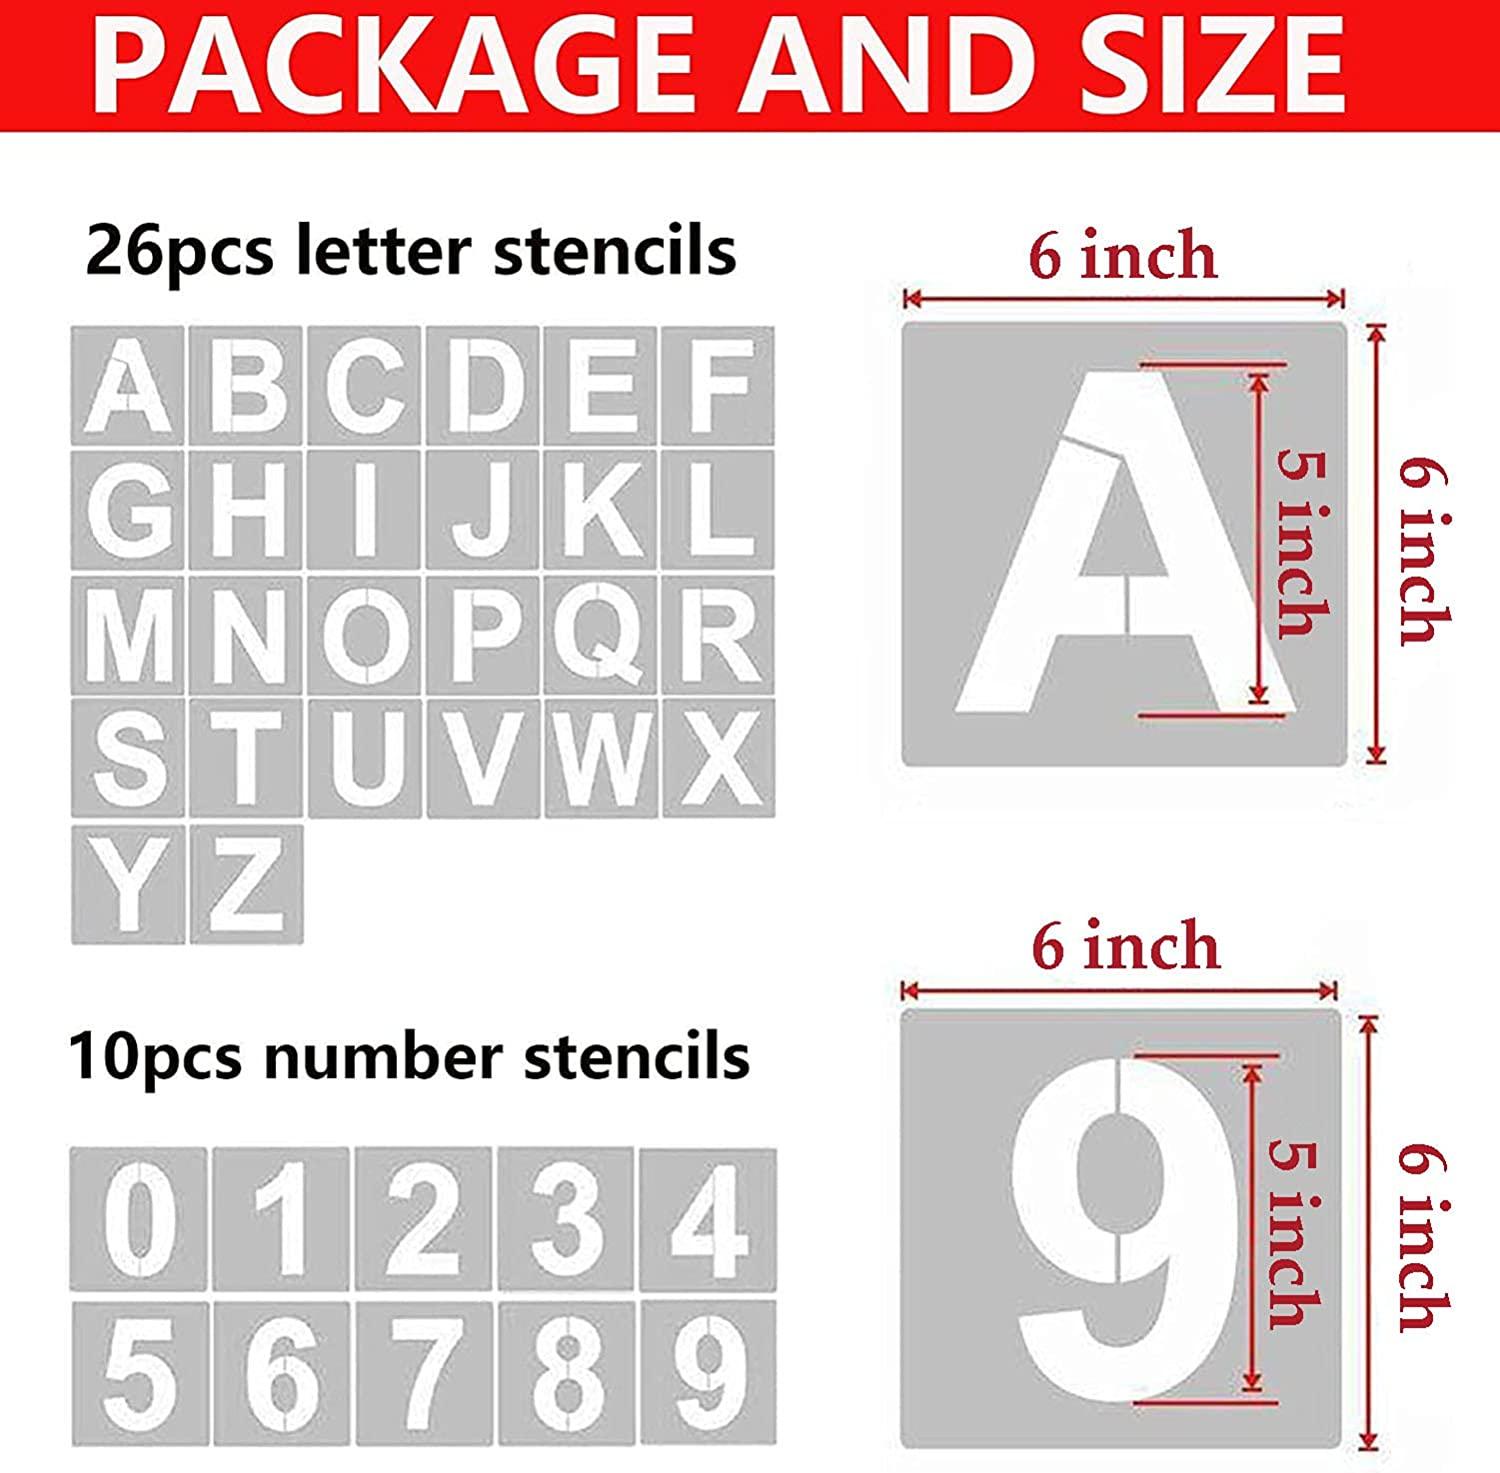 YEAJON 3 Inch Letter Stencils Symbol Numbers Craft Stencils, 66 Pcs  Reusable Plastic Alphabet Templates for Painting on Wood, Wall, Fabric,  Rock, Glass, Chalkboard, Signage, DIY Art Projects